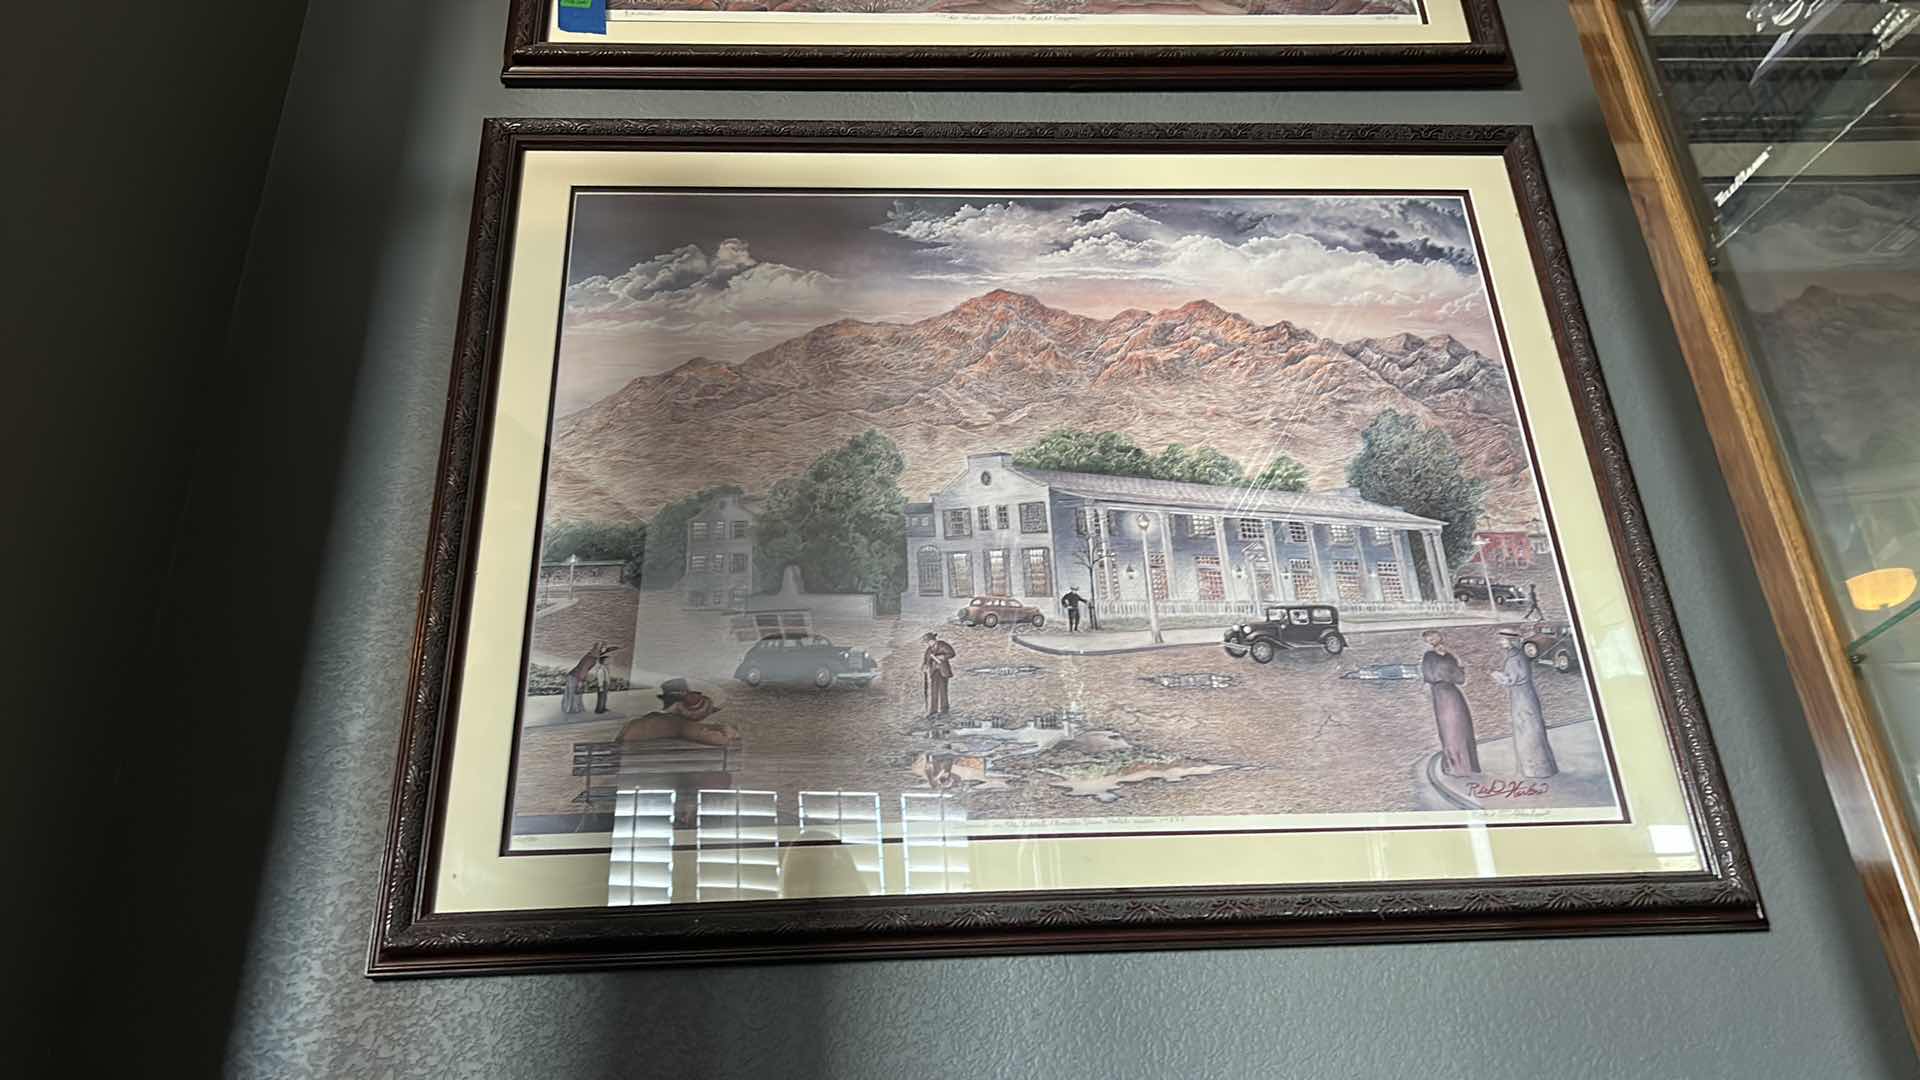 Photo 7 of WALL DECOR - SIGNED NUMBERED’ “DIAMOND IN THE DESERT BOULDER DAM HOTEL CIRCA 1937 FRAMED ARTWORK 43” x 32”